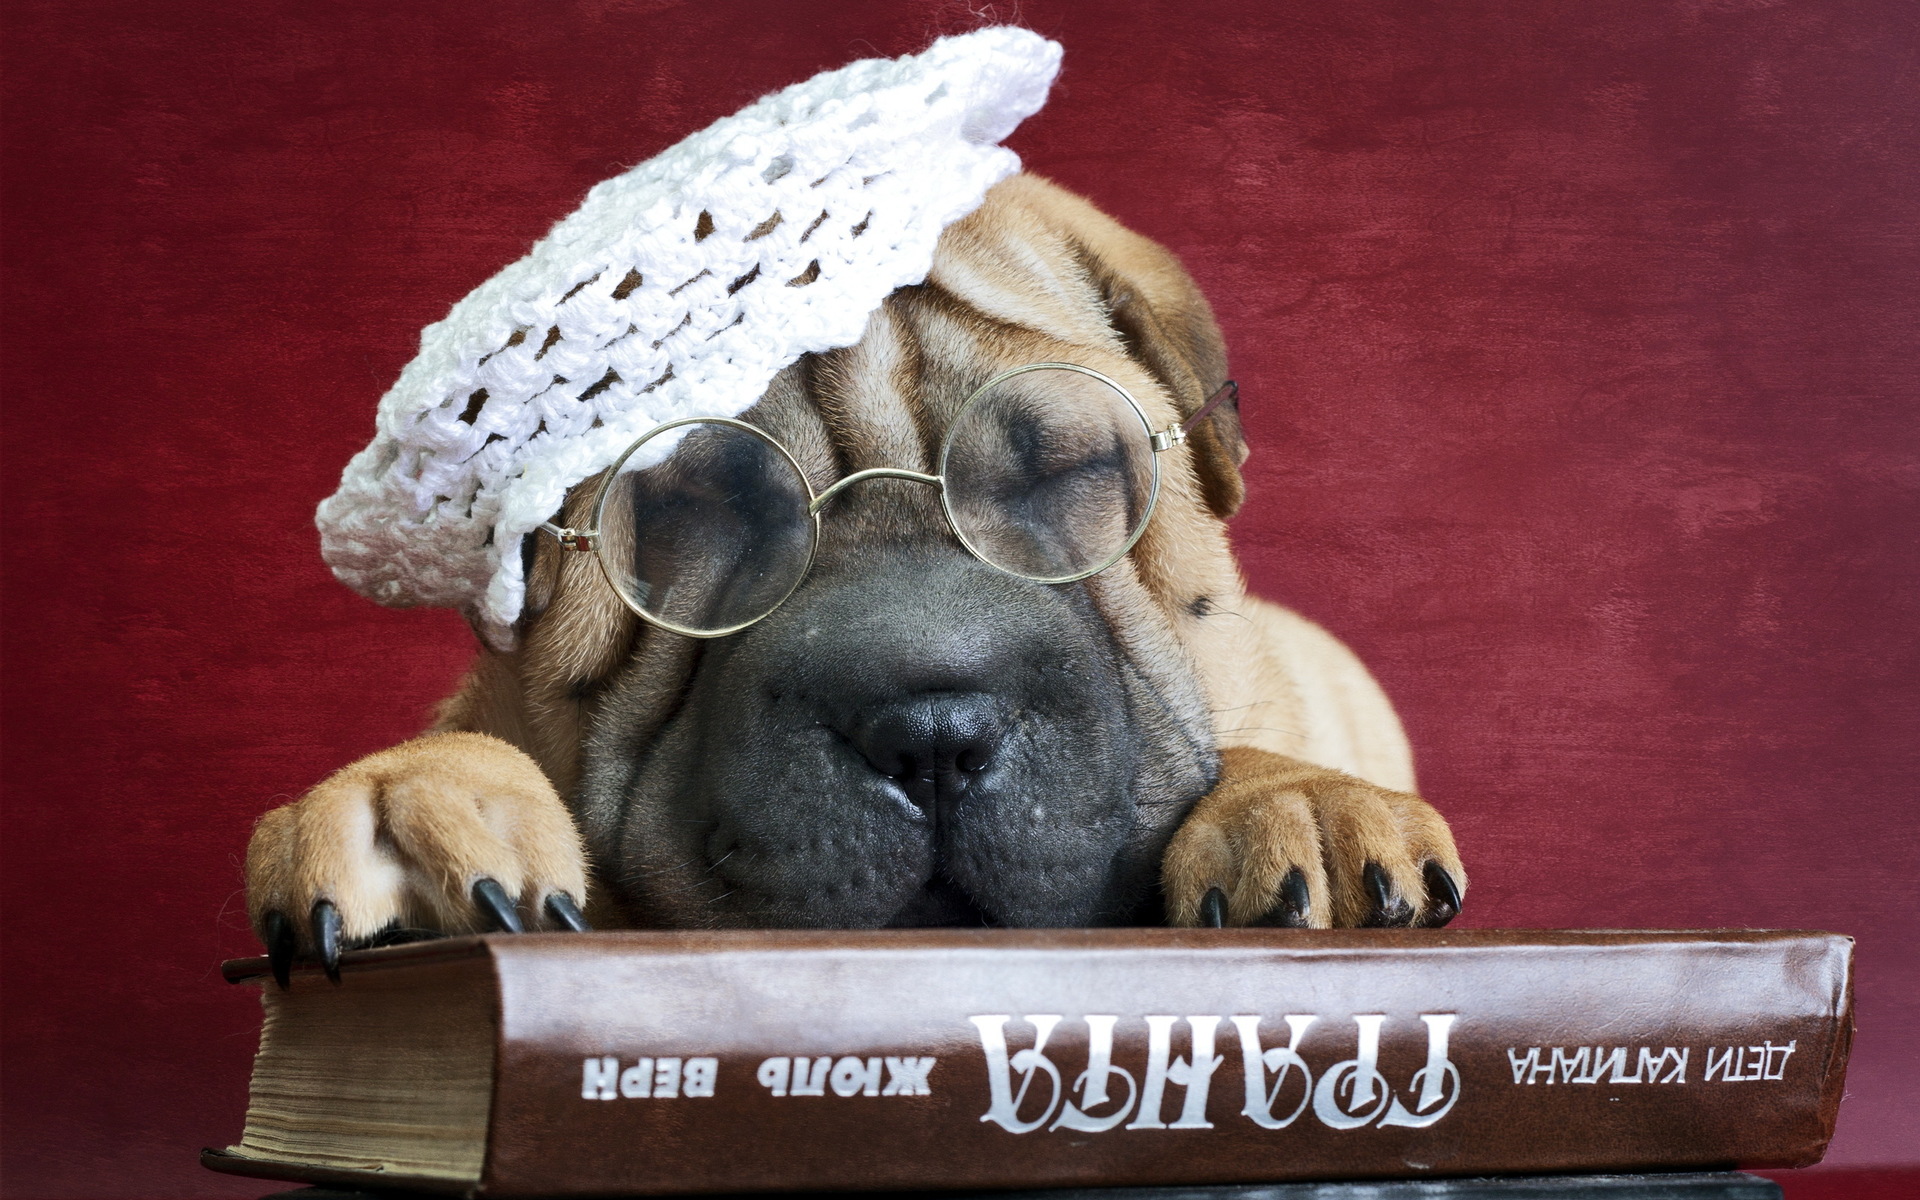 shar-pei-puppy-with-glasses-and-hat-animal-hd-wallpaper-1920x1200-36587.jpg